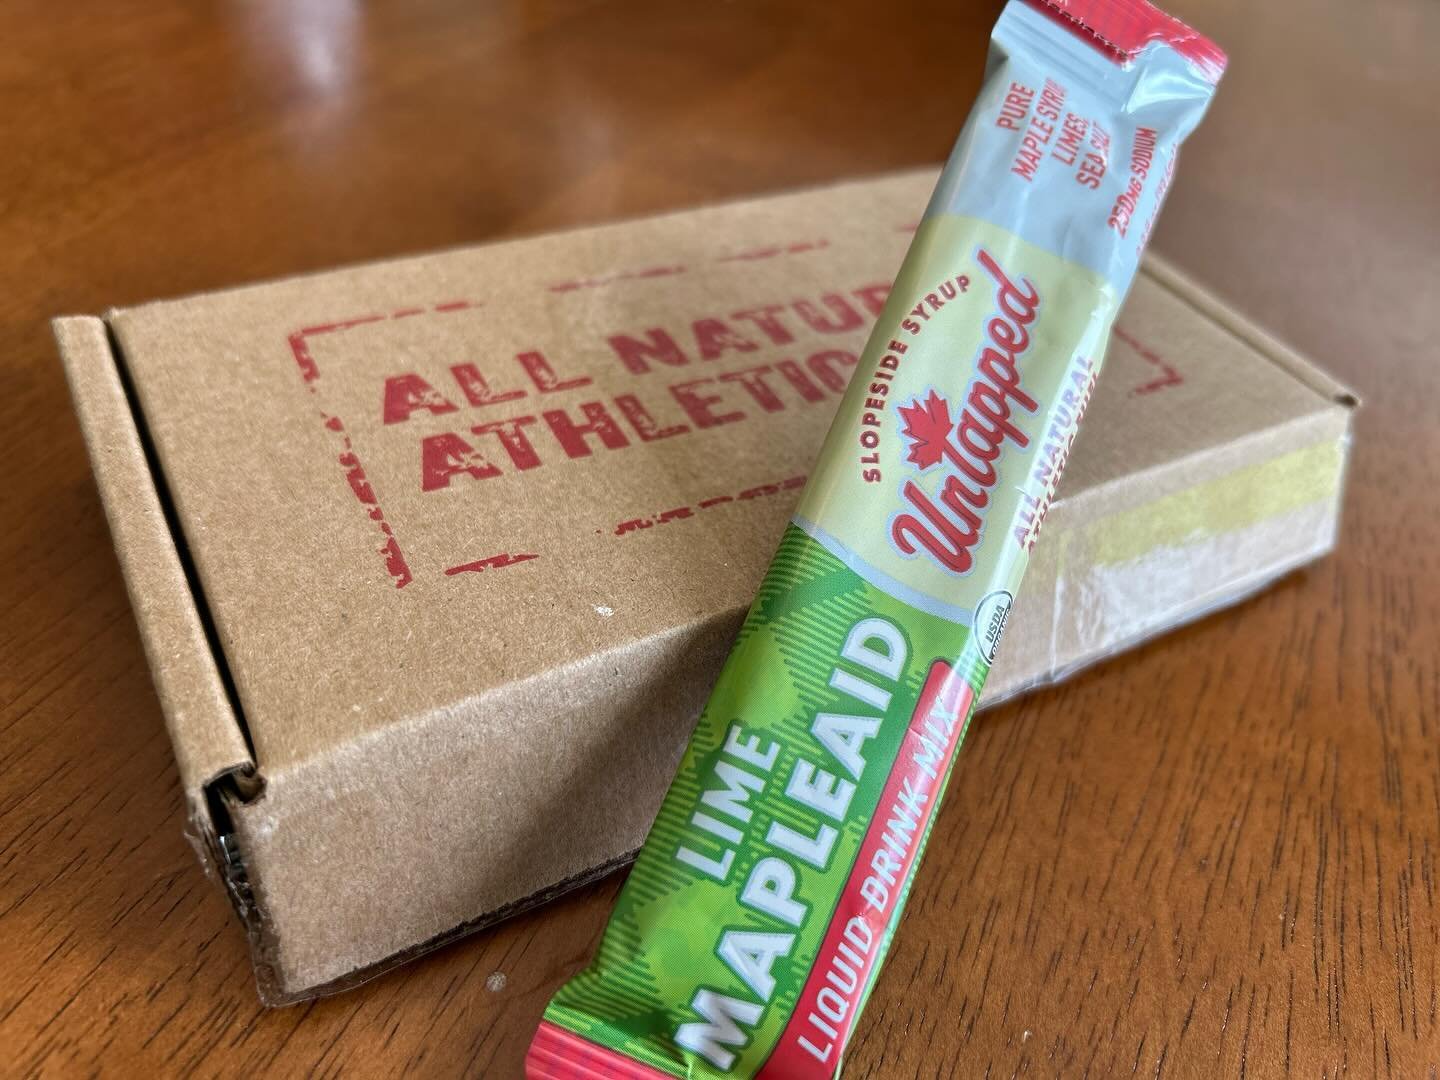 We just posted our review of UnTapped&rsquo;s (@untappedmaple) Lime Maple Aid liquid drink mix on creakybottombracket.com. Drink mixes for endurance athletes should balance nutrition with the right amount of flavor. UnTapped&rsquo;s pursuit of maple 